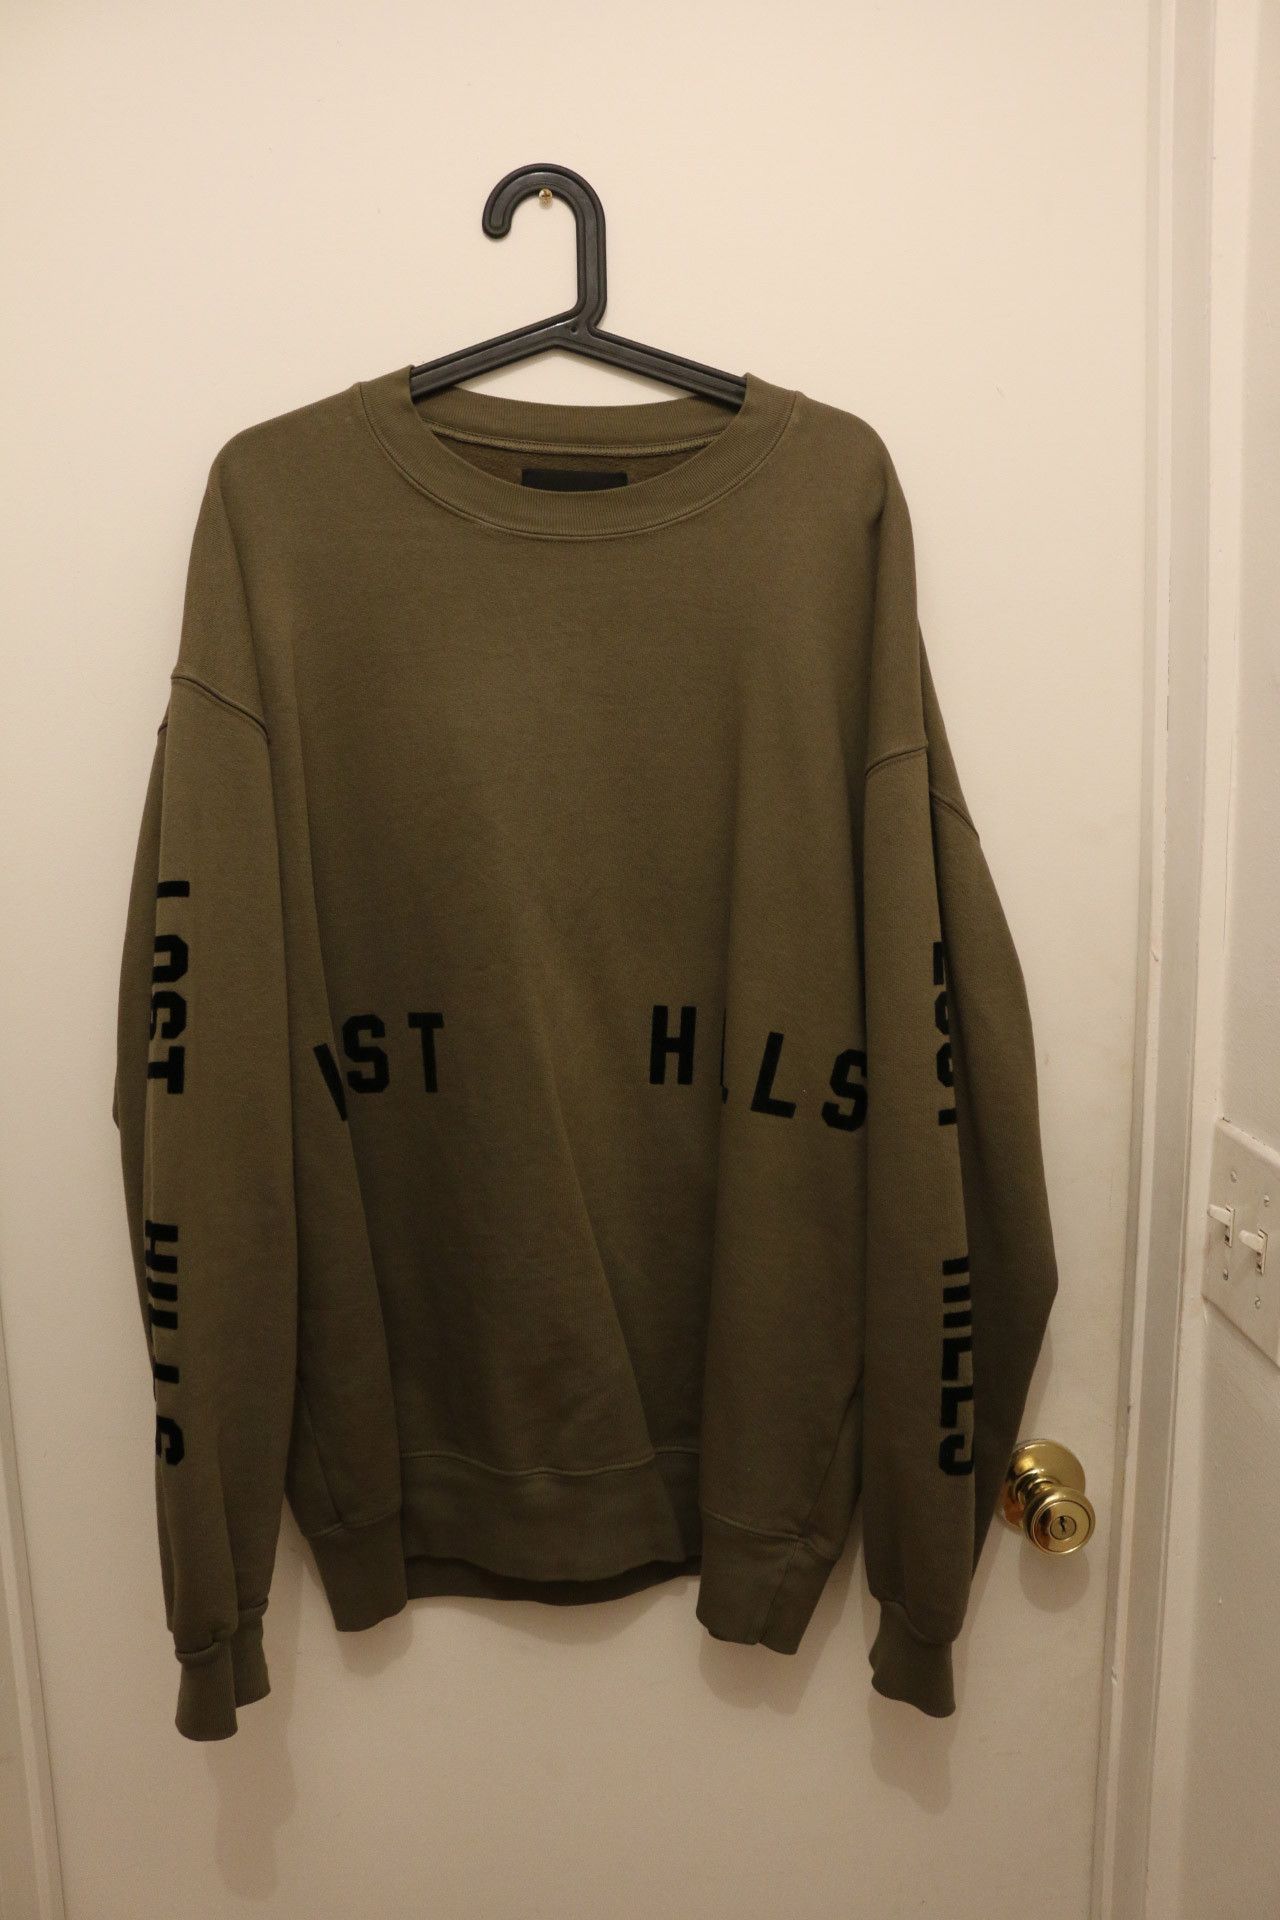 Kanye West RELISTED! NEW LISTING. Lost Hills Season 5 Invite Sweater ...